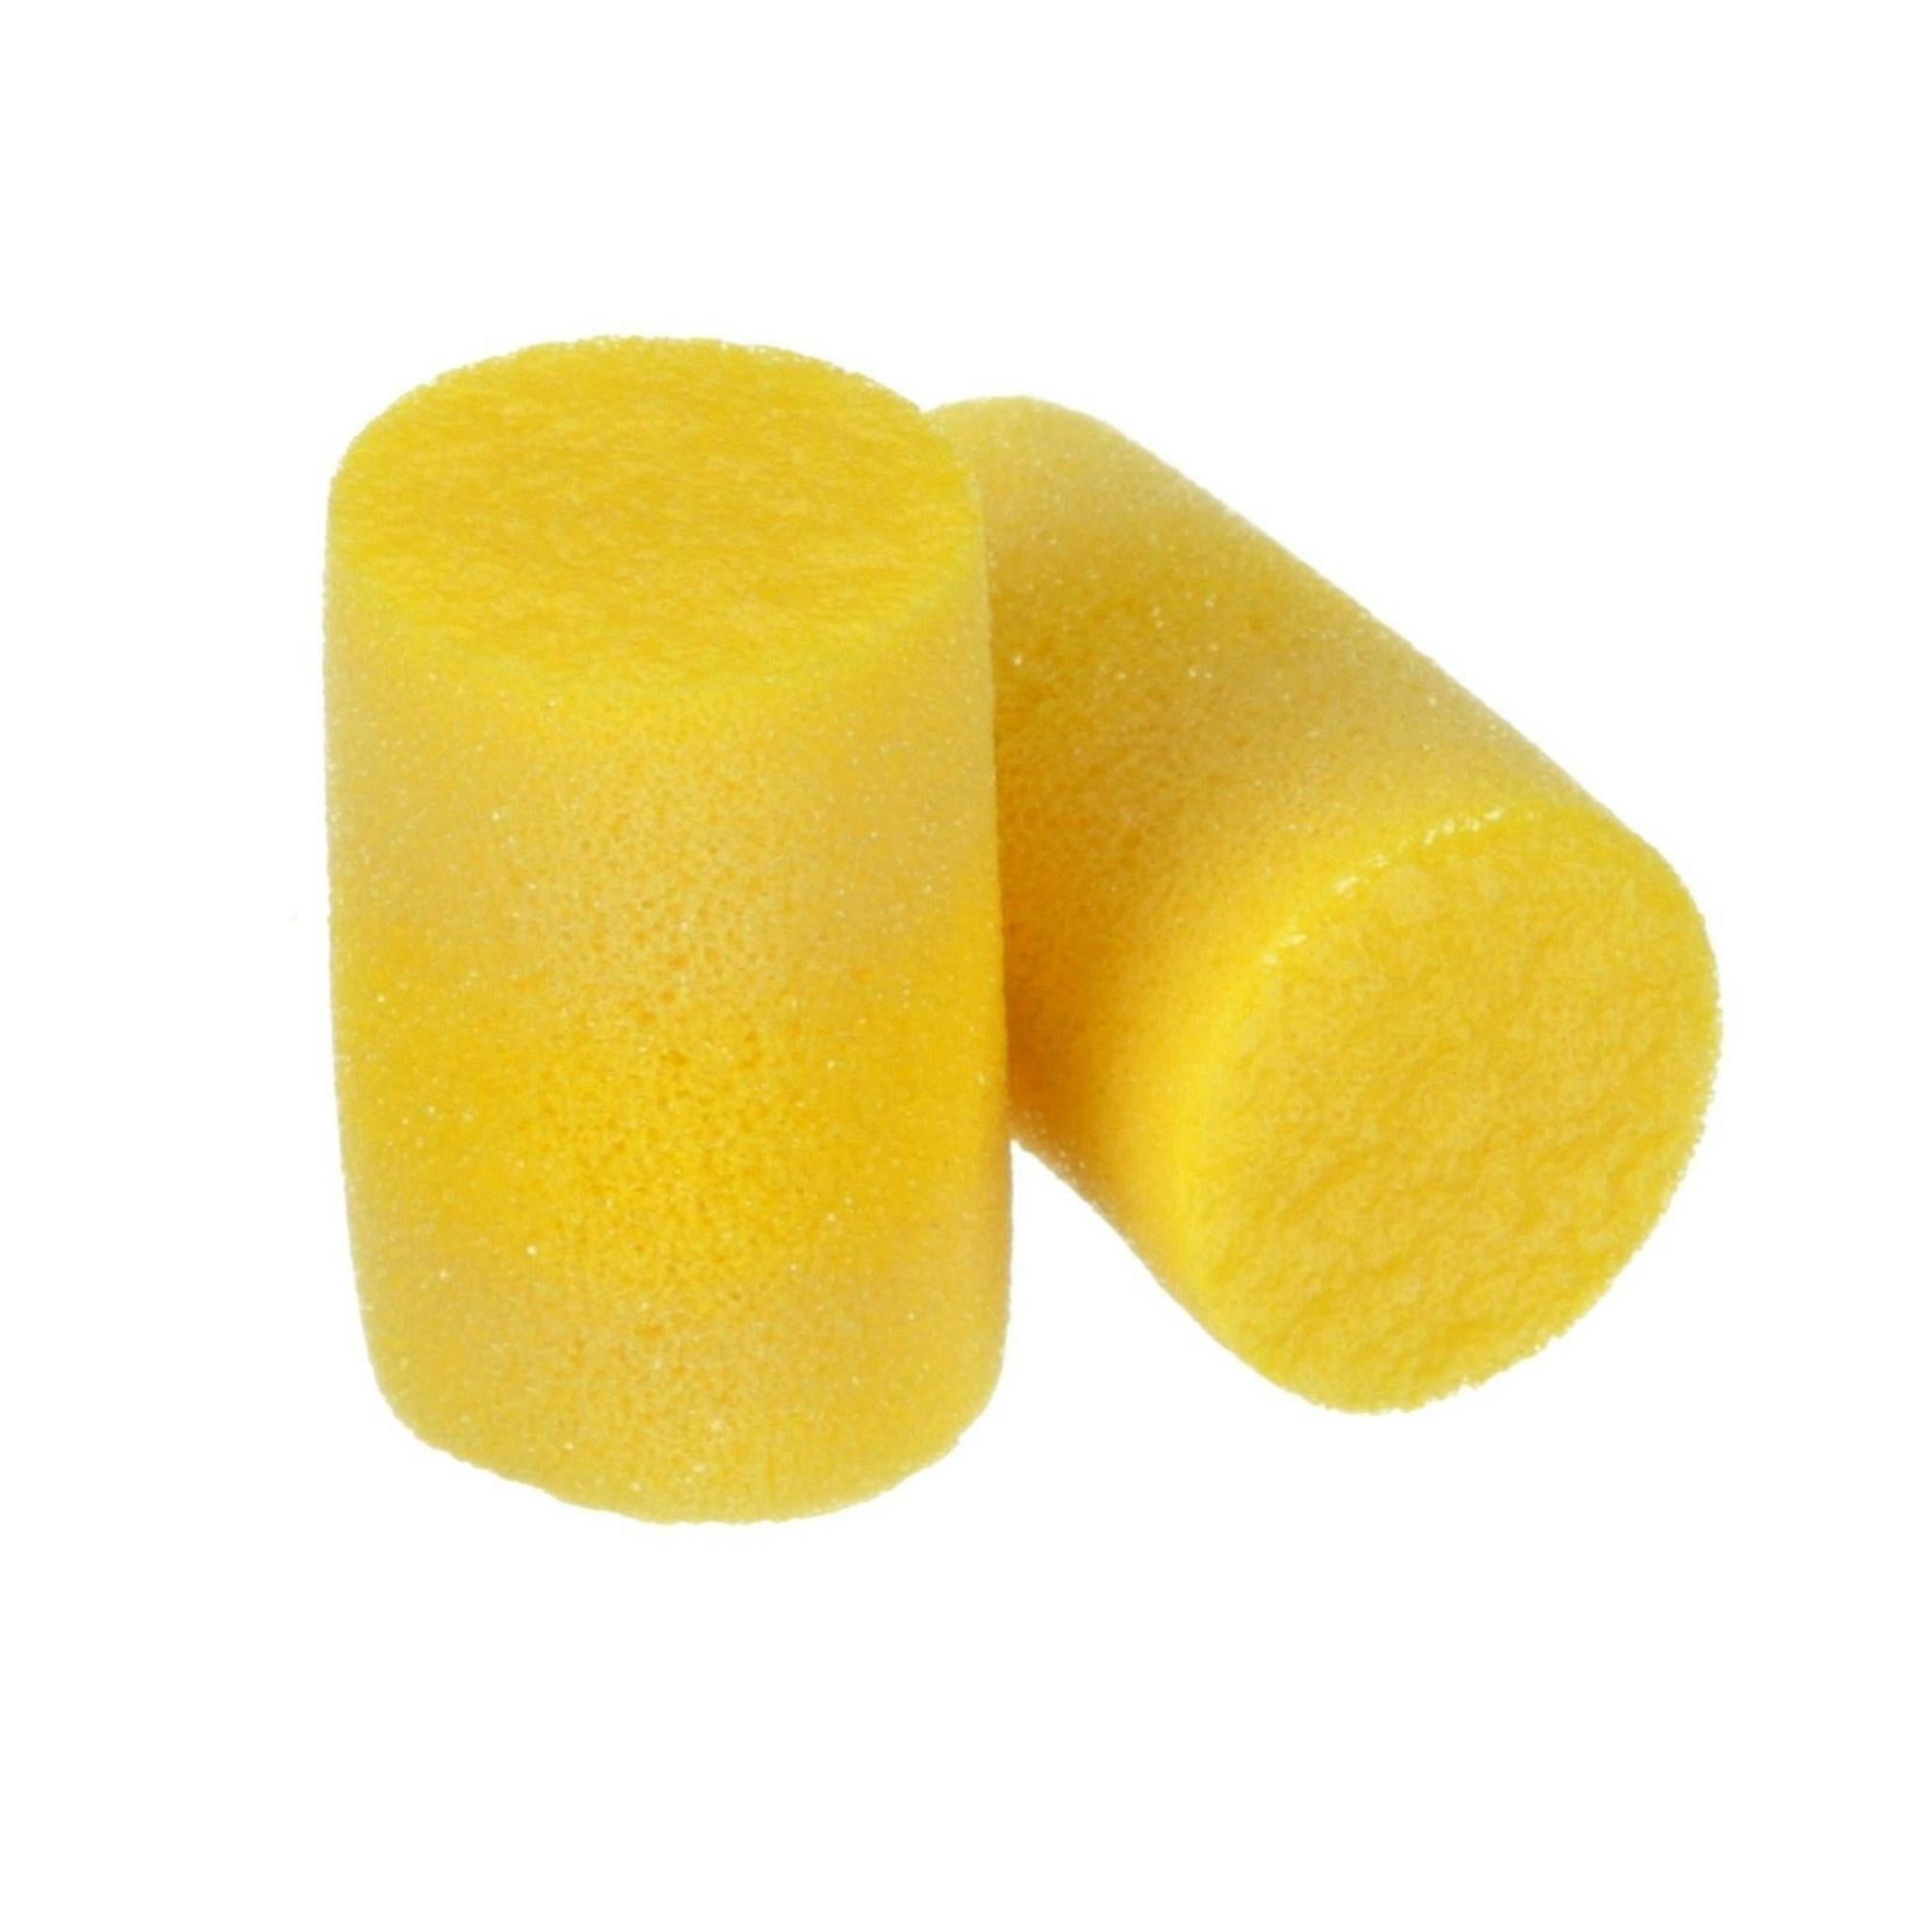 3M™ E-A-R™ Classic™ Earplugs 310-1001, Uncorded, Pillow Pack